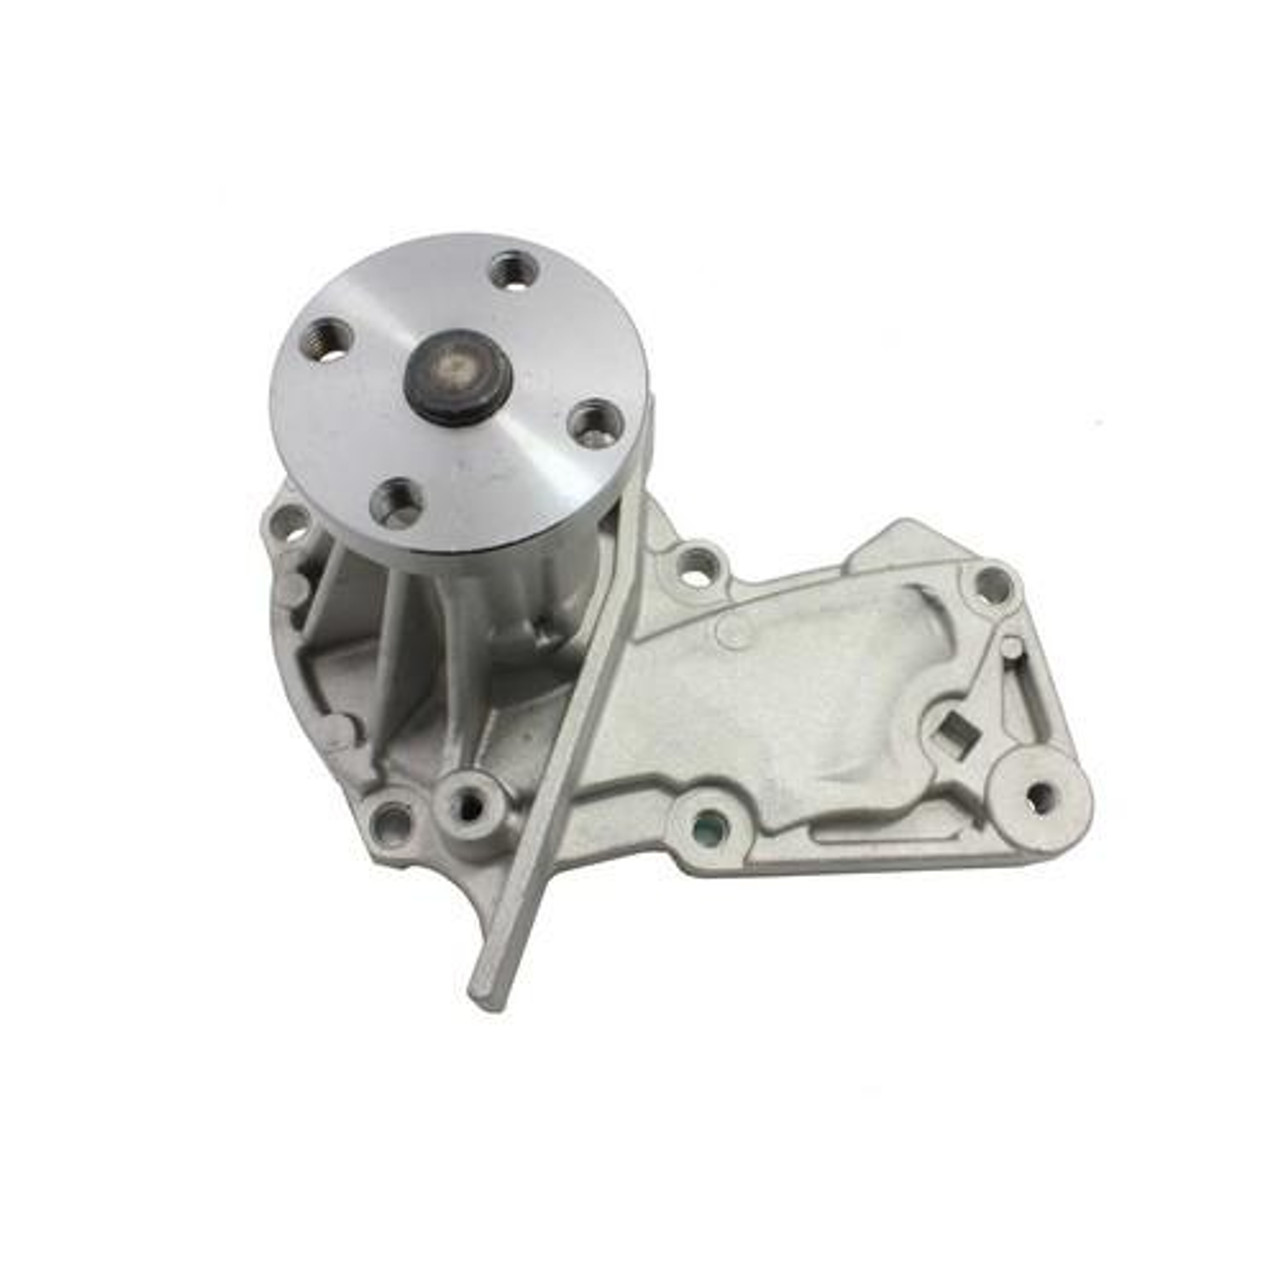 Water Pump - 2014 Ford Fiesta 1.6L Engine Parts # WP4314ZE5